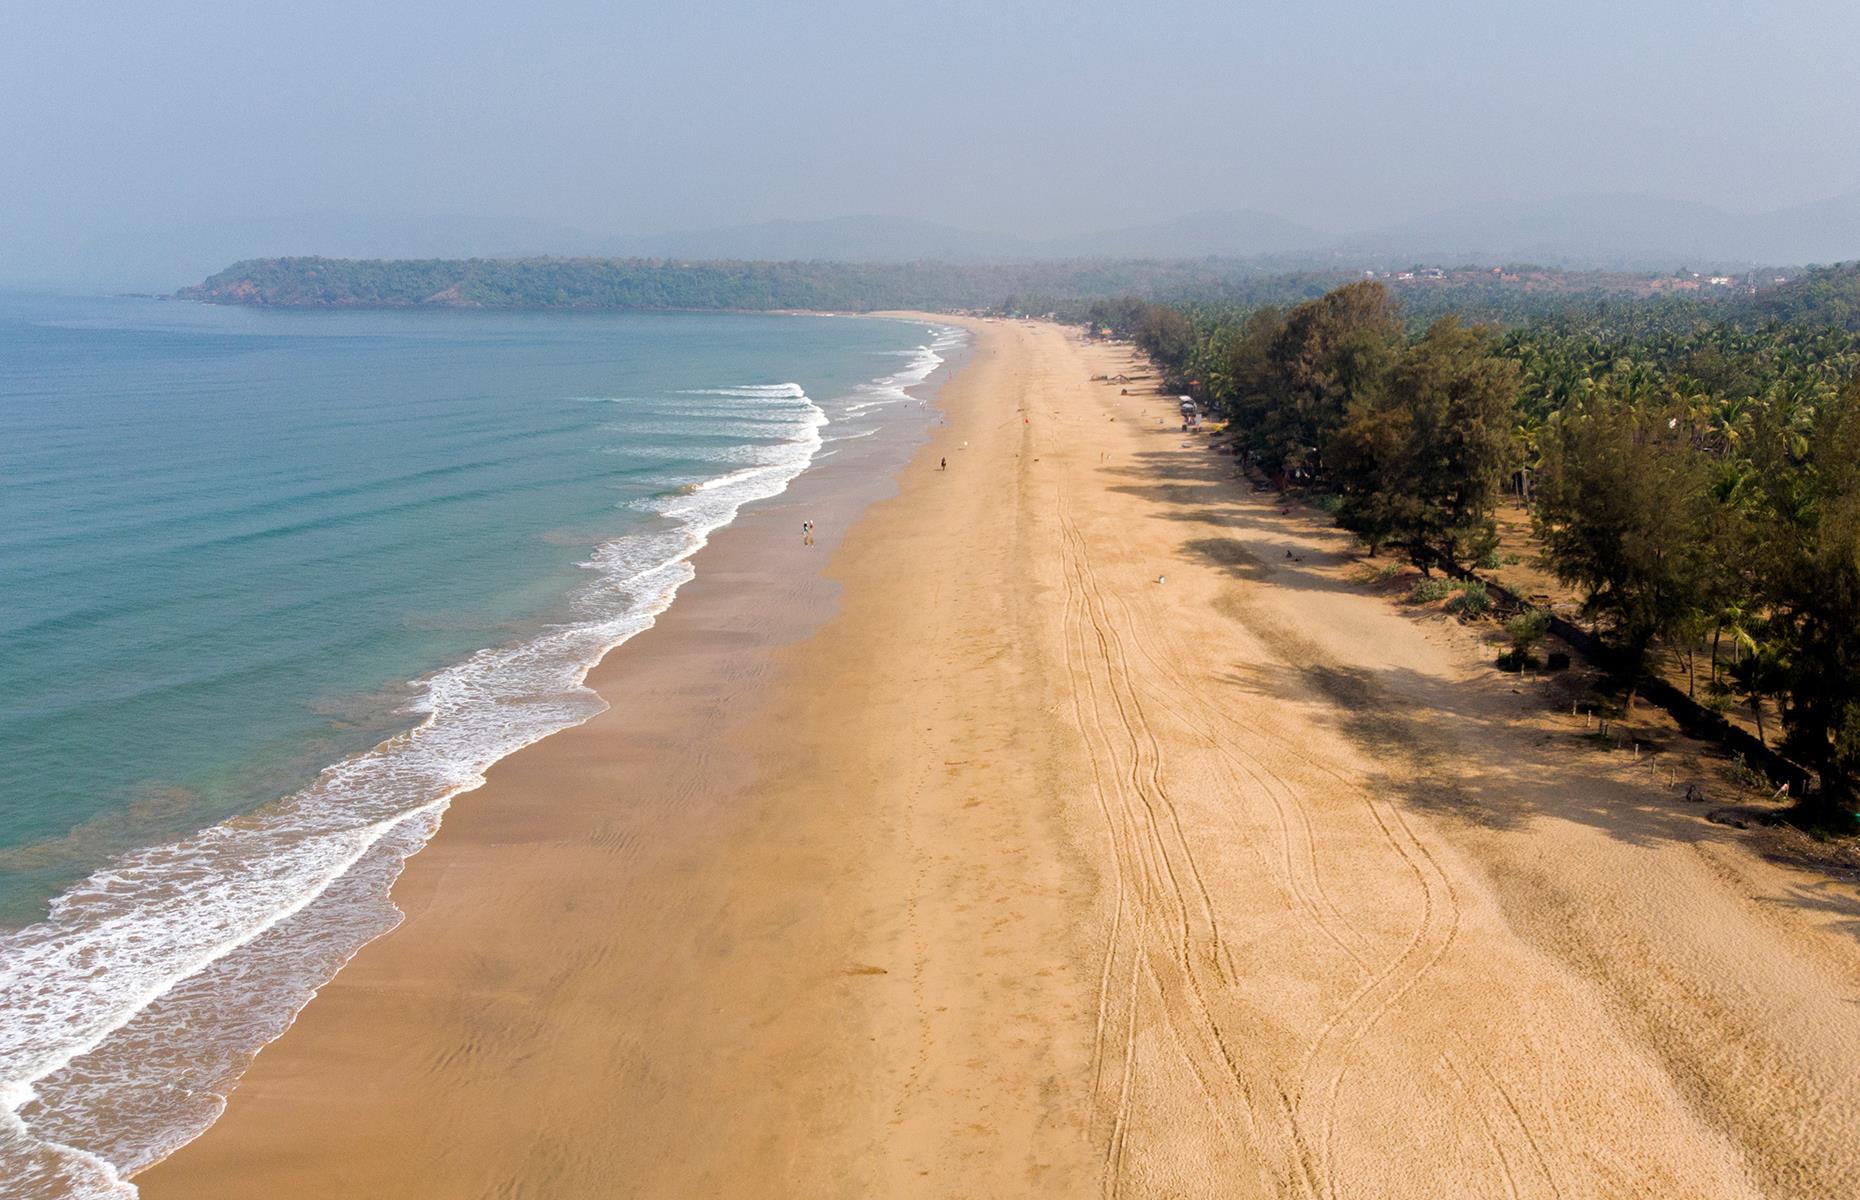 India’s laidback coastal region is blessed with beautiful beaches, including the relatively quiet Agonda bay in the sleepier southern portion of the state. Here wooden boats bob on the water and coconut palms fringe the golden stretch of sand, while the northern end of the beach is a protected nesting site for the Olive Ridley turtle.